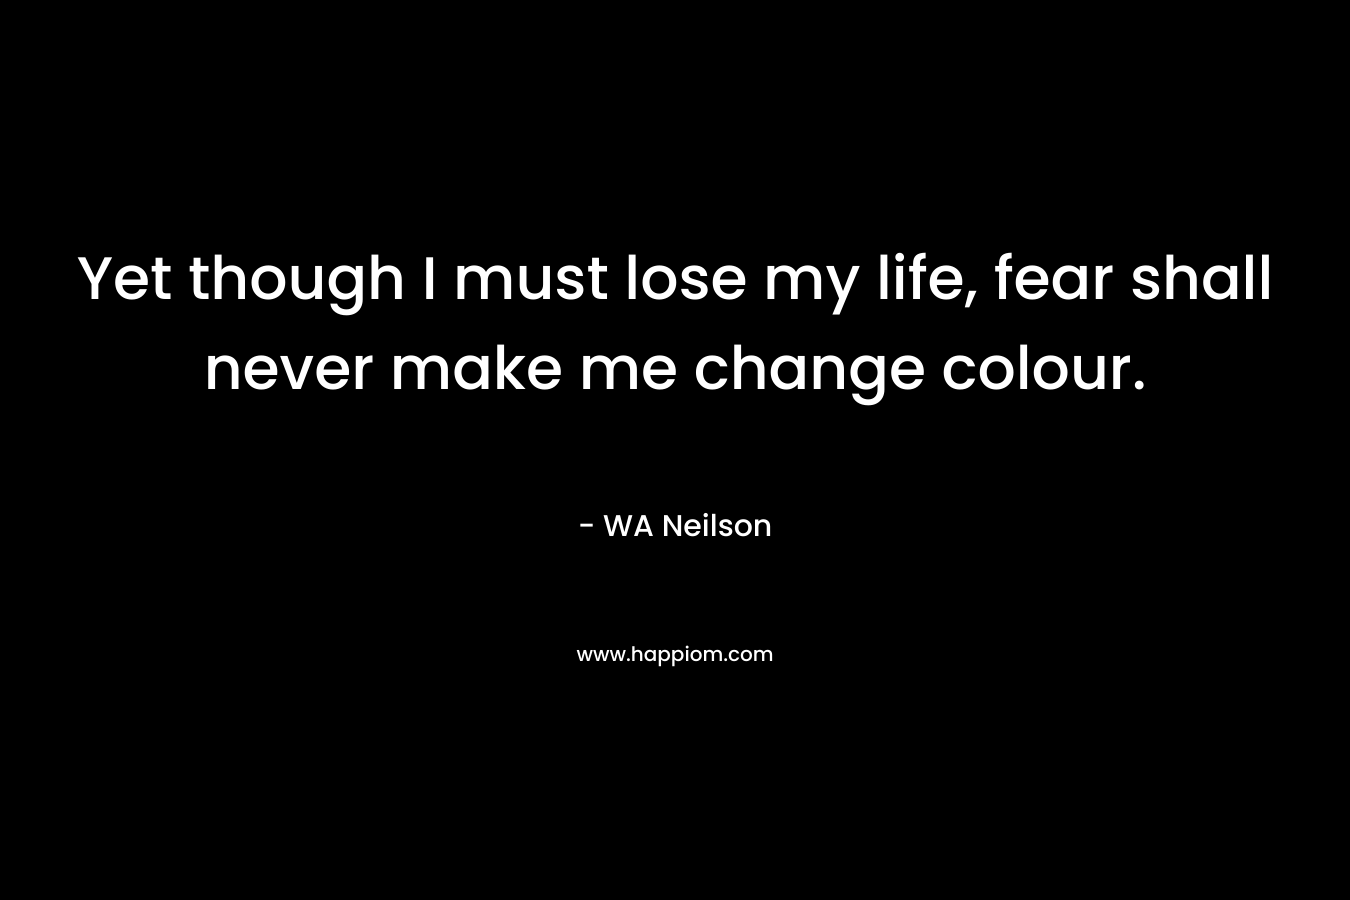 Yet though I must lose my life, fear shall never make me change colour. – WA Neilson